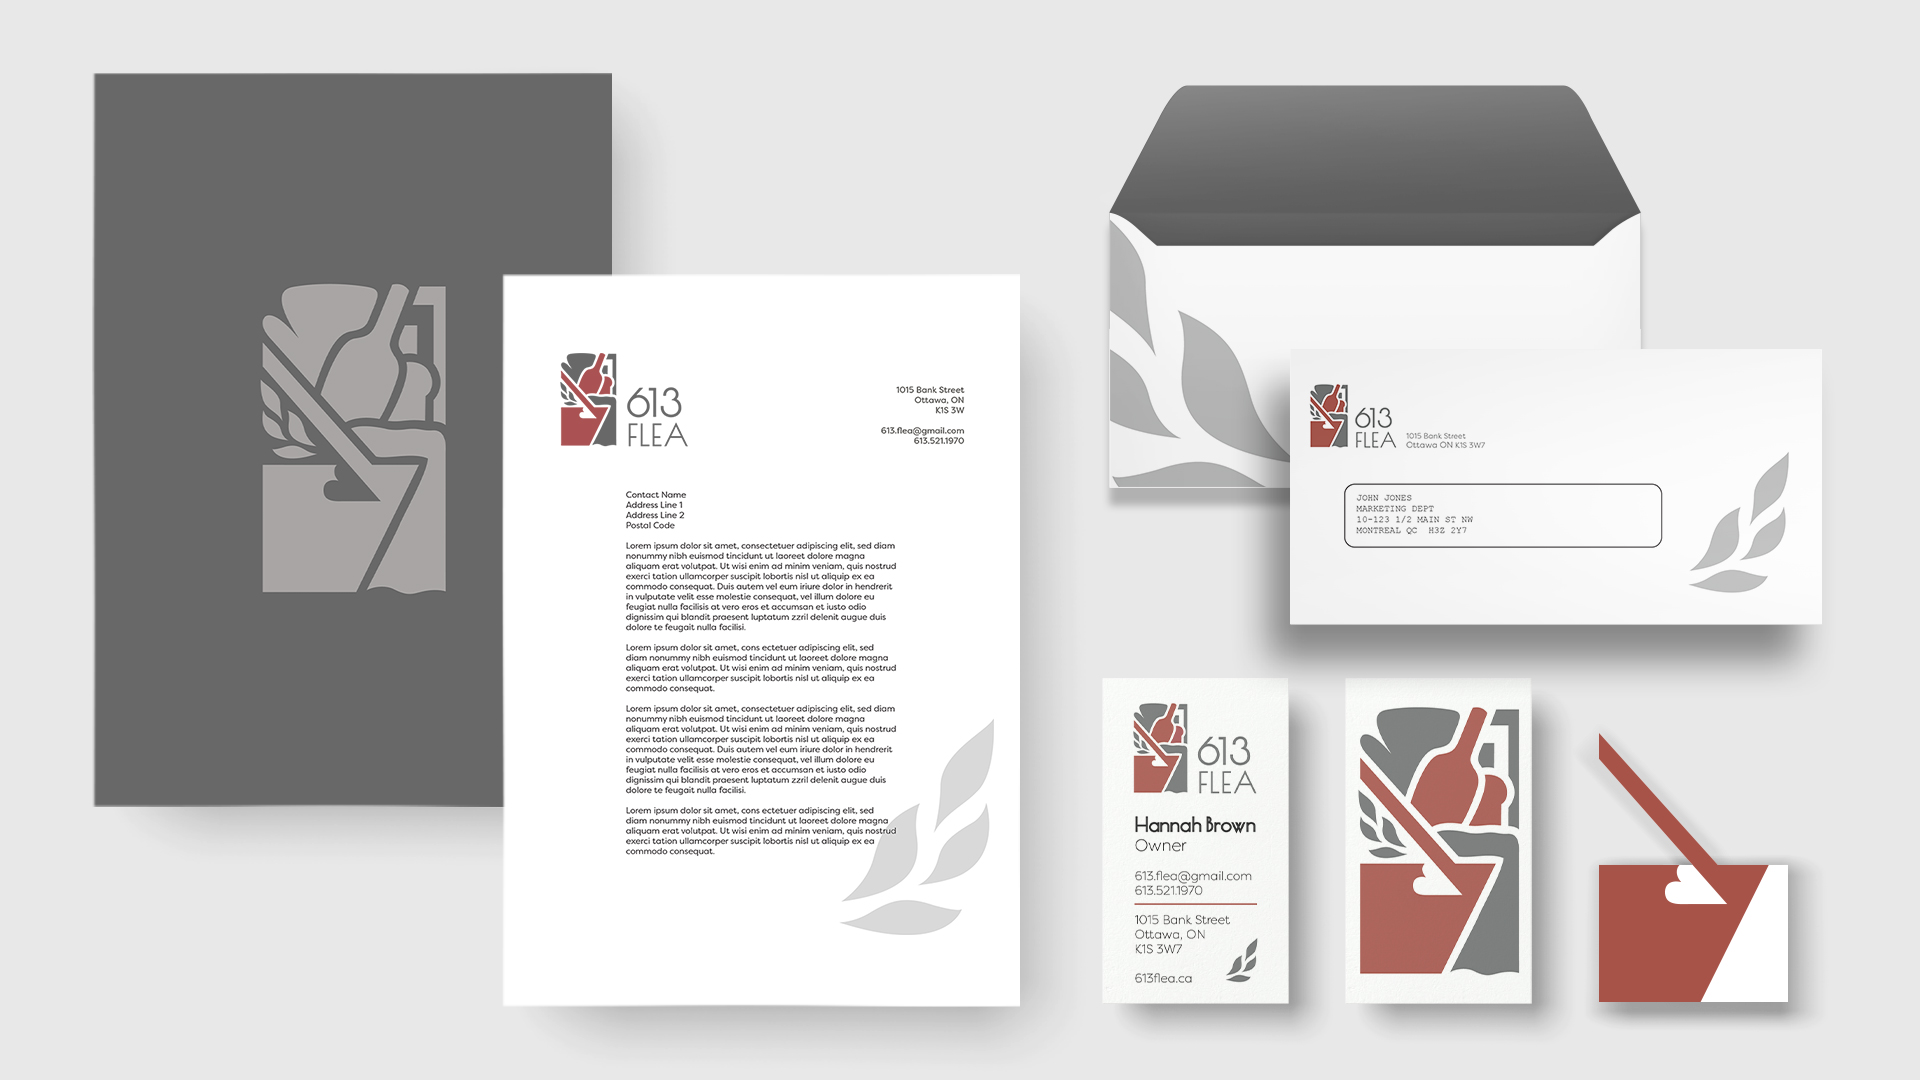 A collection of 613 Flea branded stationery, including letterhead, envelope, and business cards with sleeve.